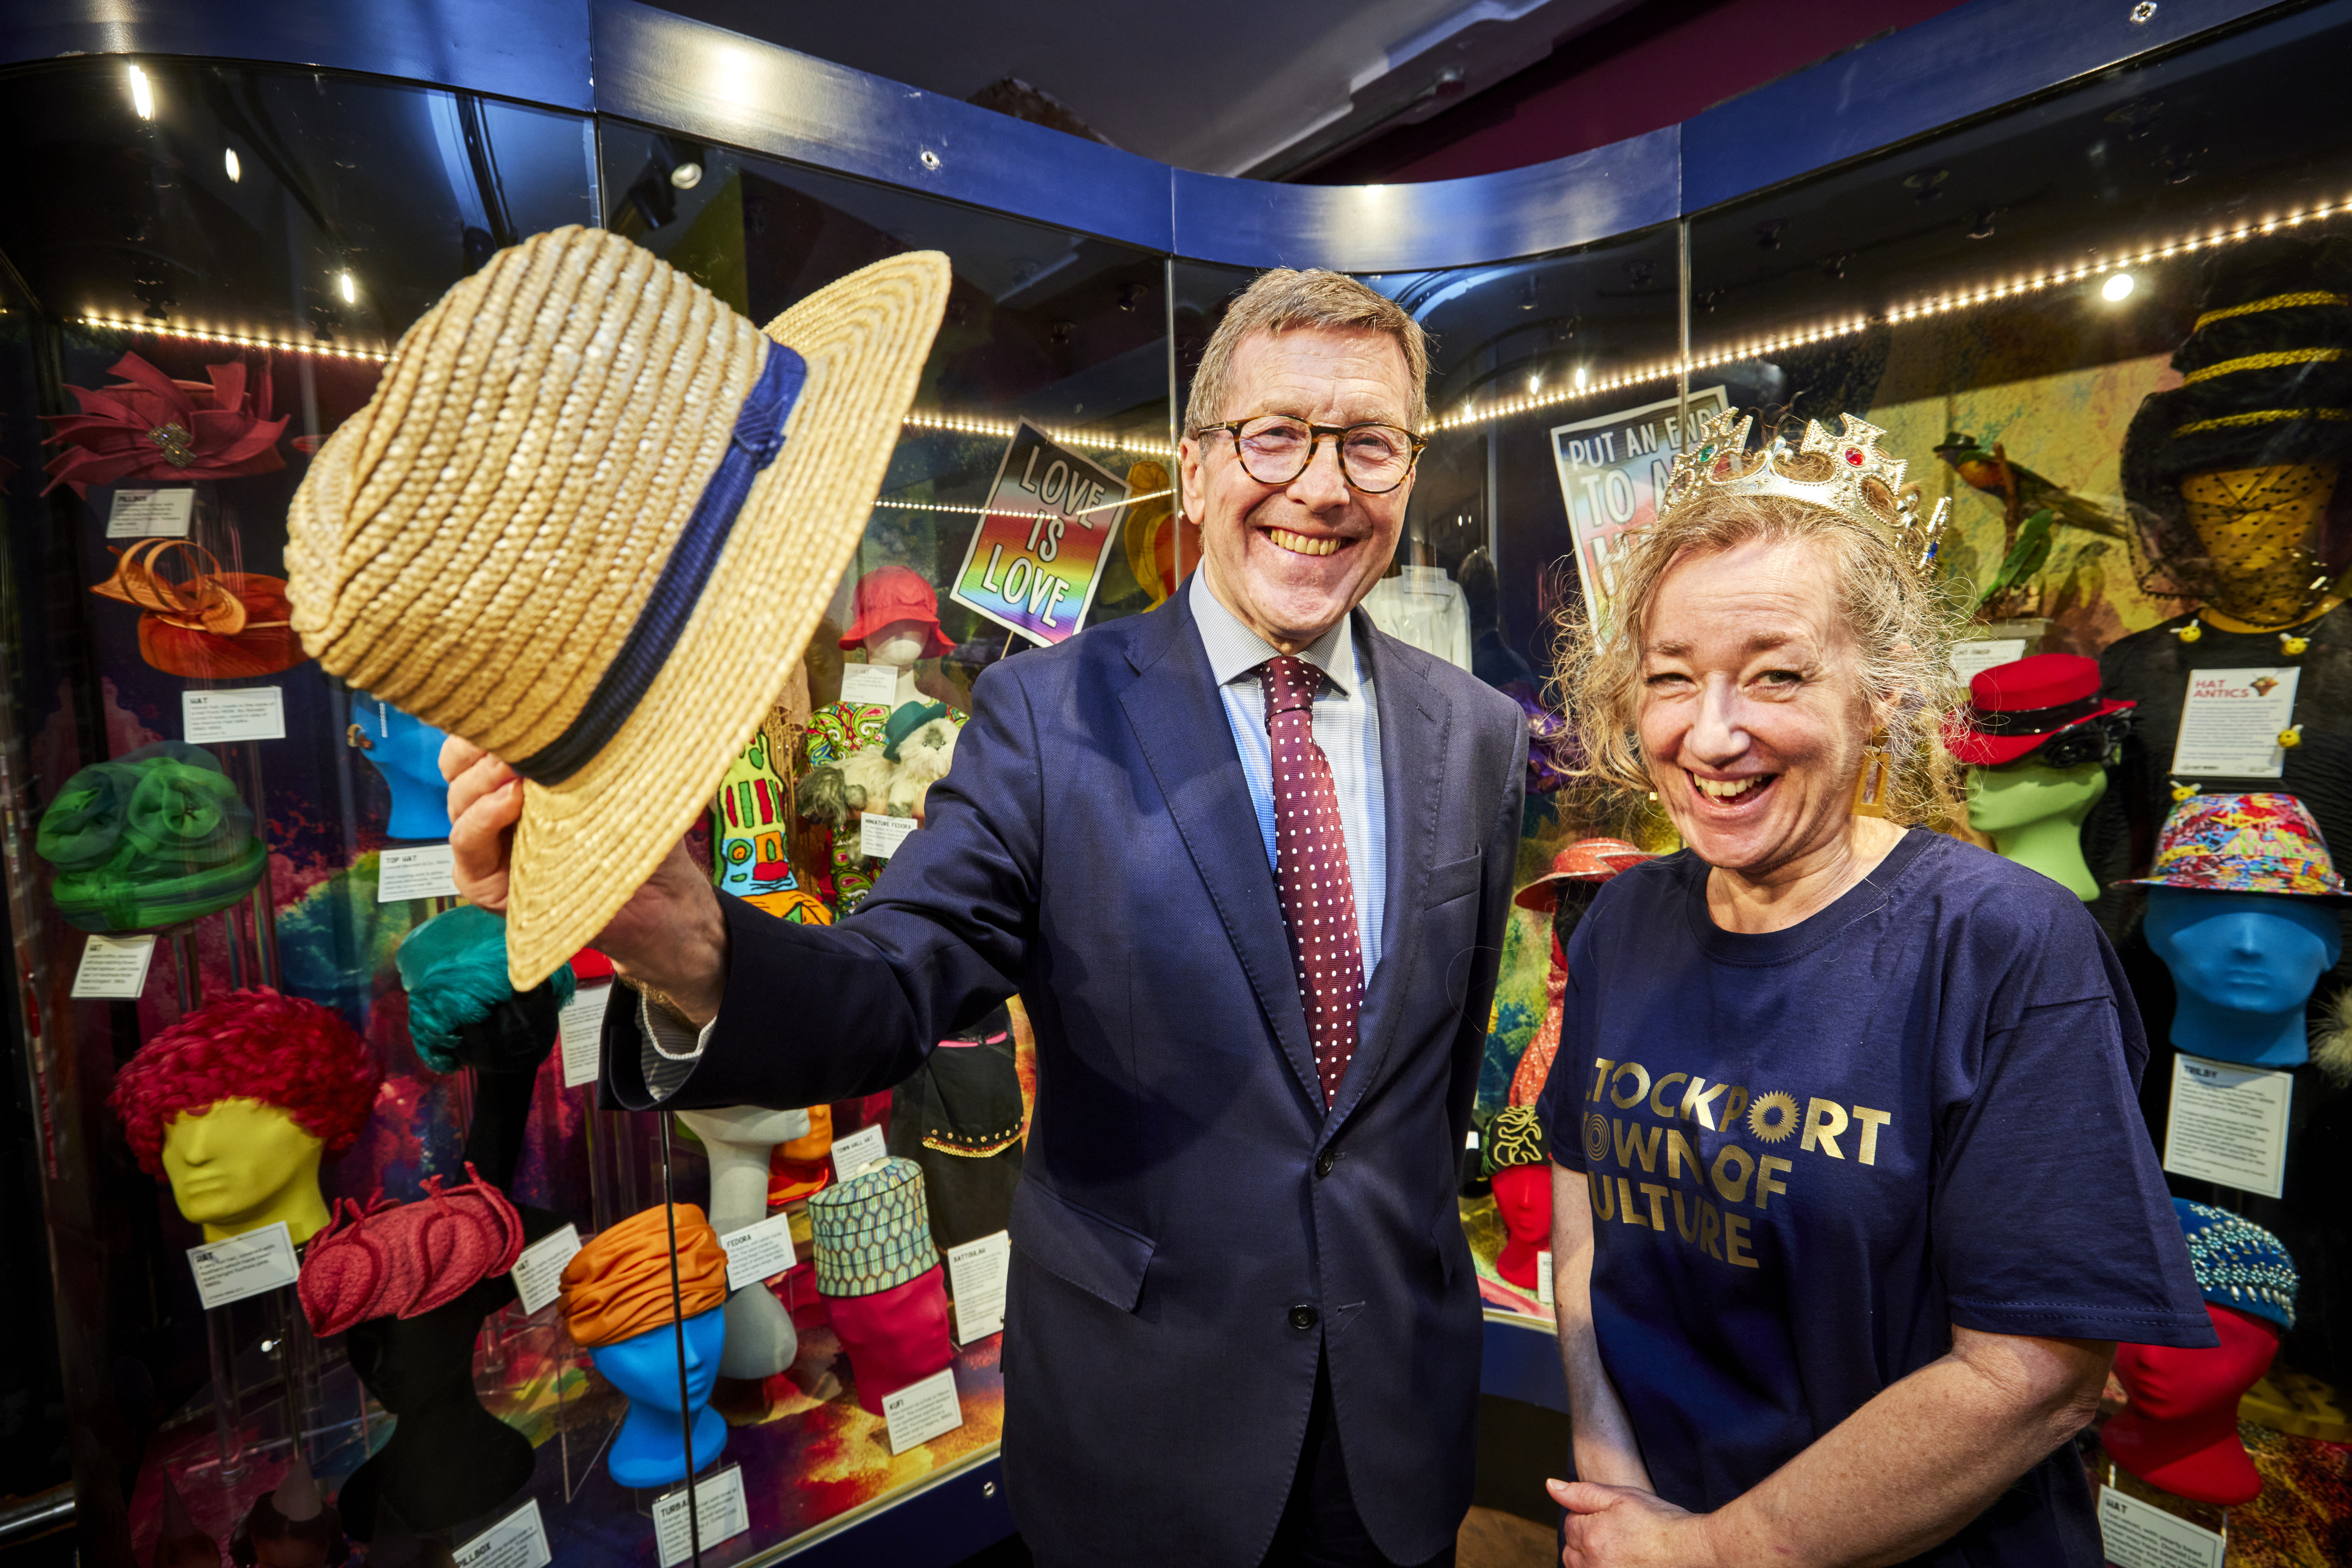 UK's only Hat Works Museum relaunches with a Vision: Stockport's